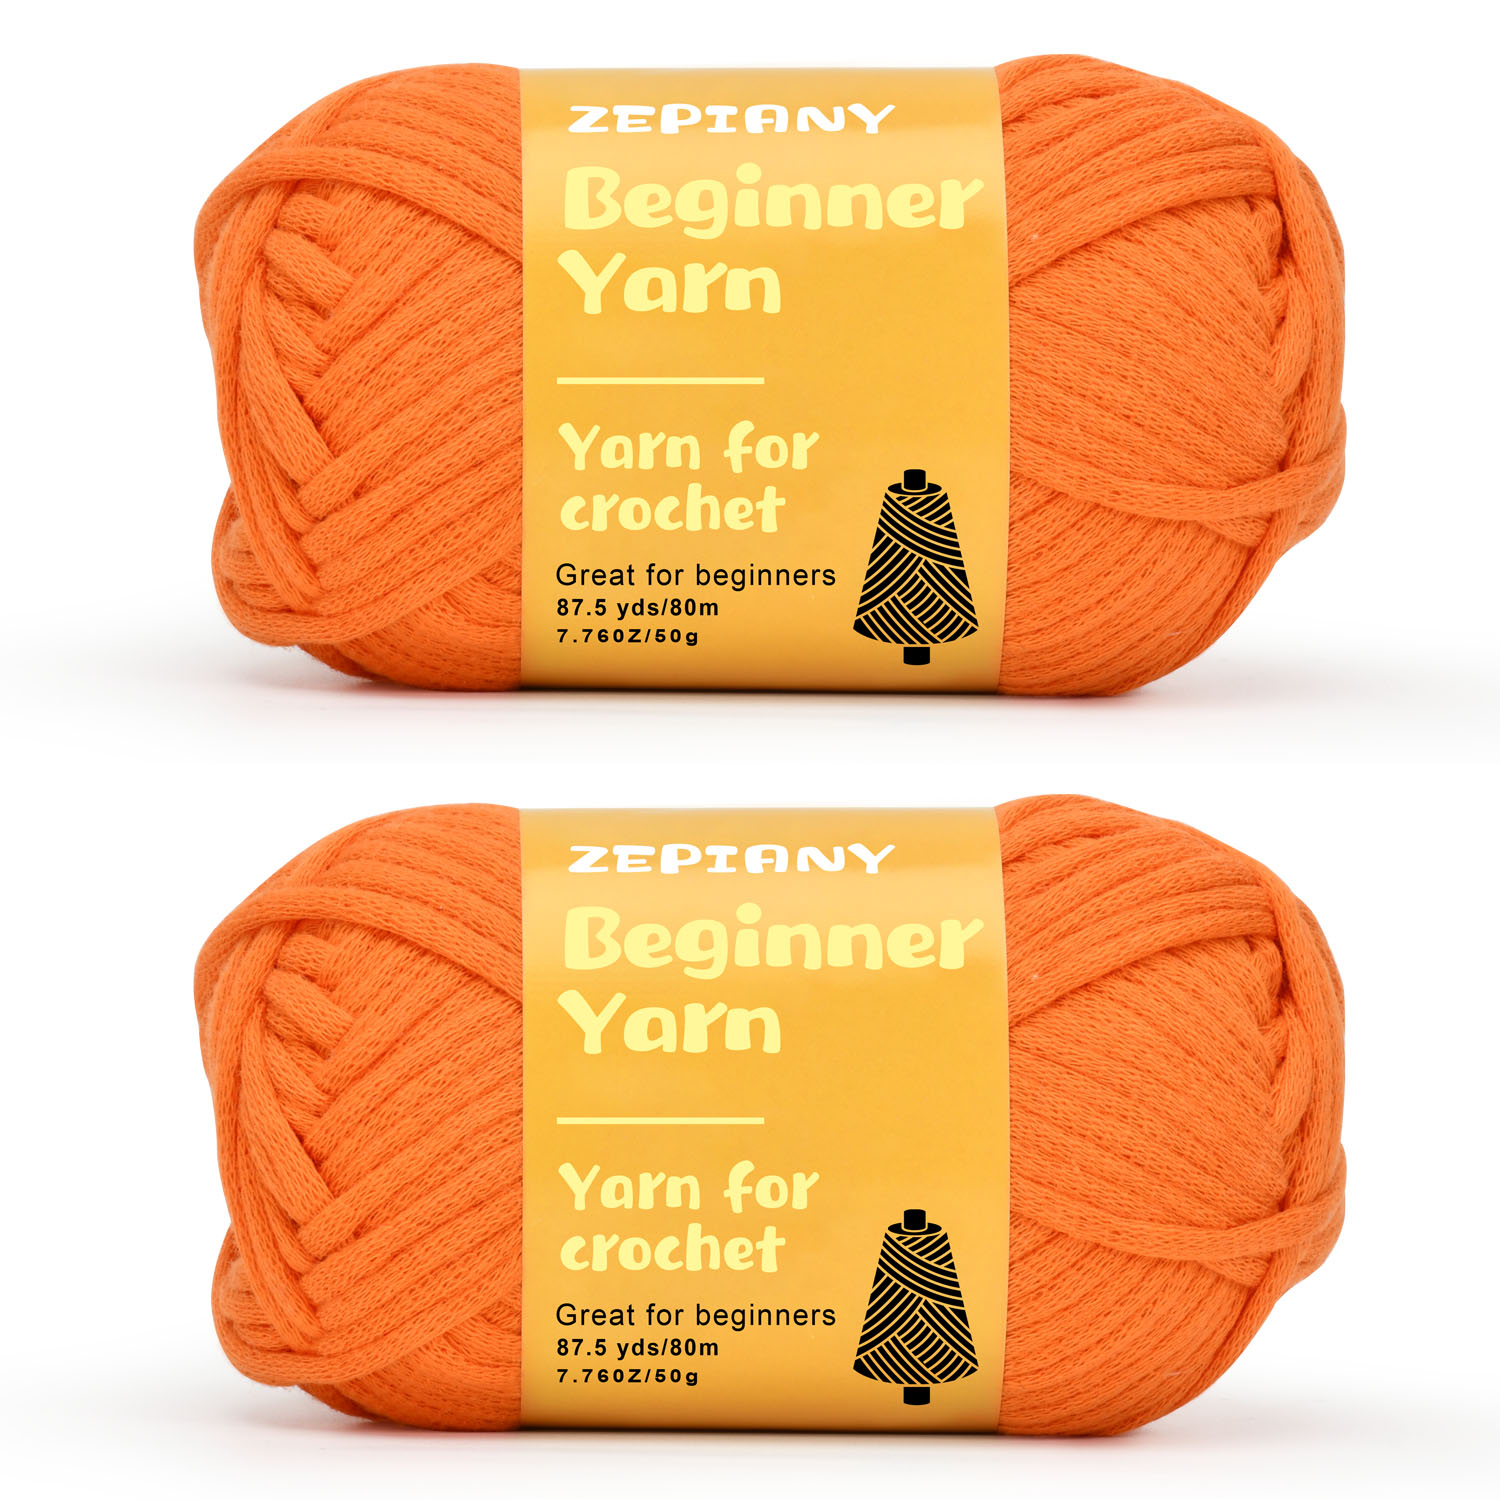  3 Pack Beginners Crochet Yarn, Green Oarnge Yellow Yarn for  Crocheting Knitting Beginners, Easy-to-See Stitches, Chunky Thick Bulky  Cotton Soft Yarn for Crocheting (3x50g)